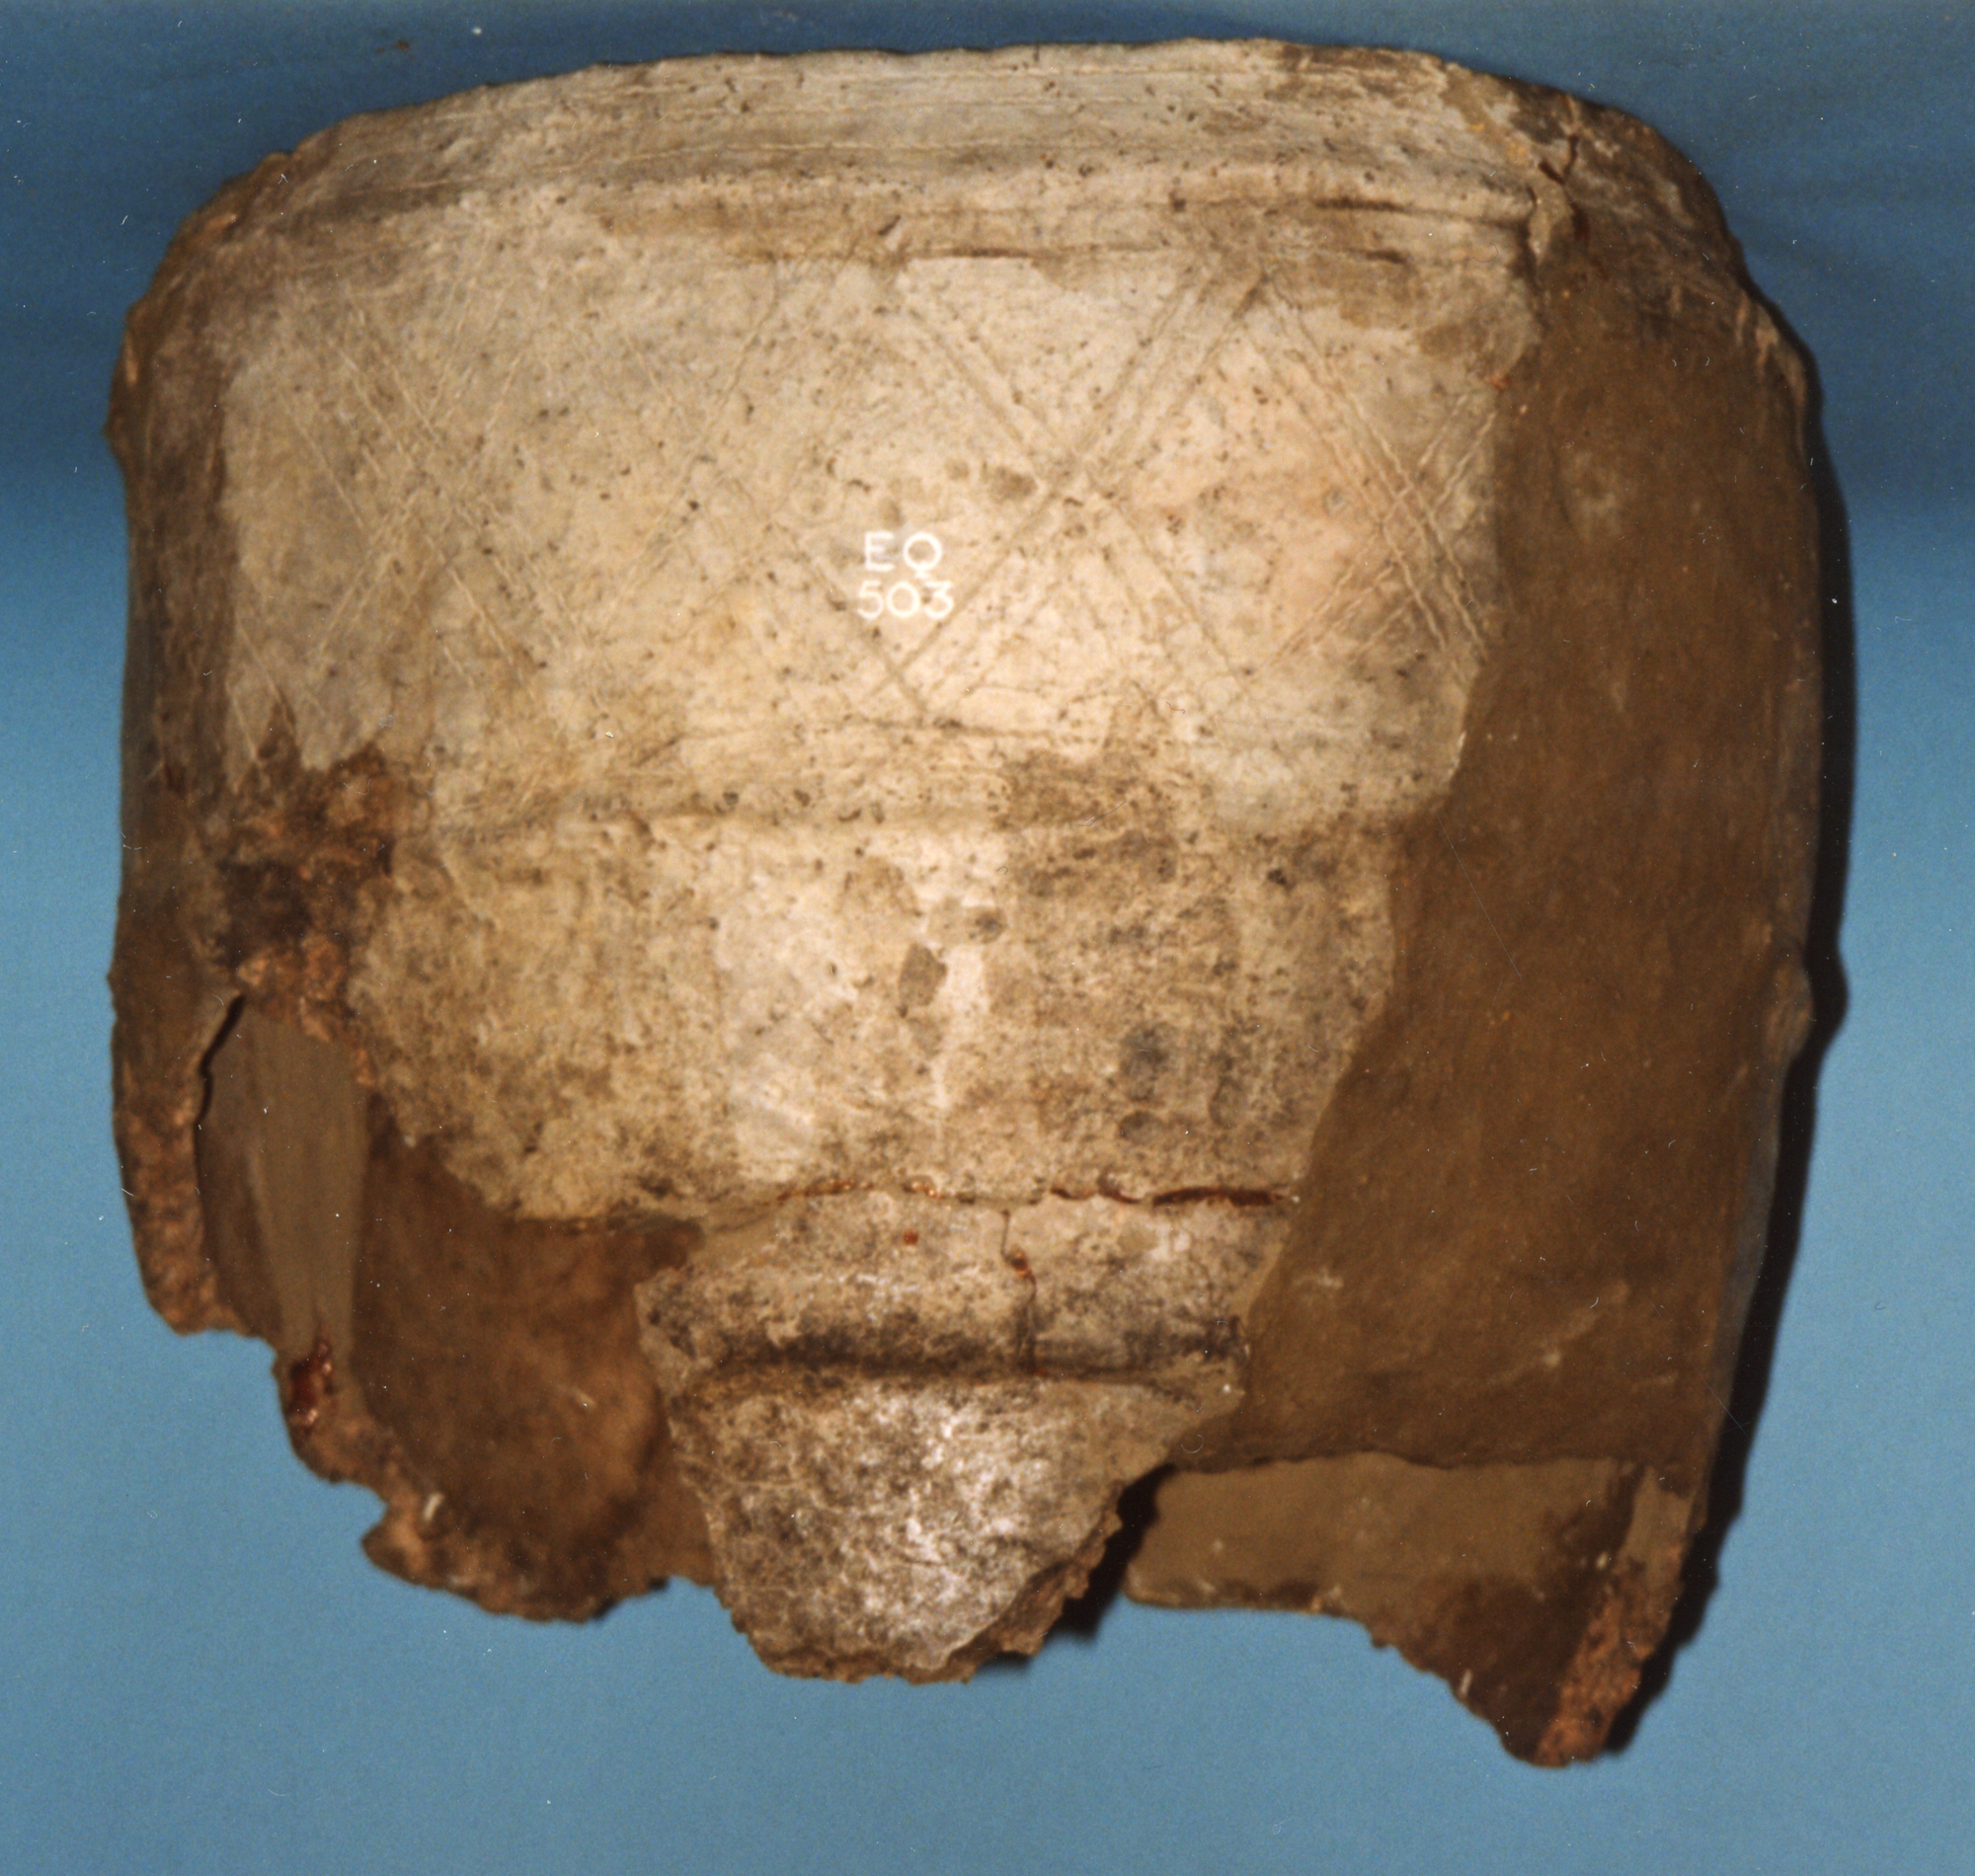 Image of Pottery / cinerary urn / incomplete, from Longniddry Golf Course, East Lothian © National Museums Scotland